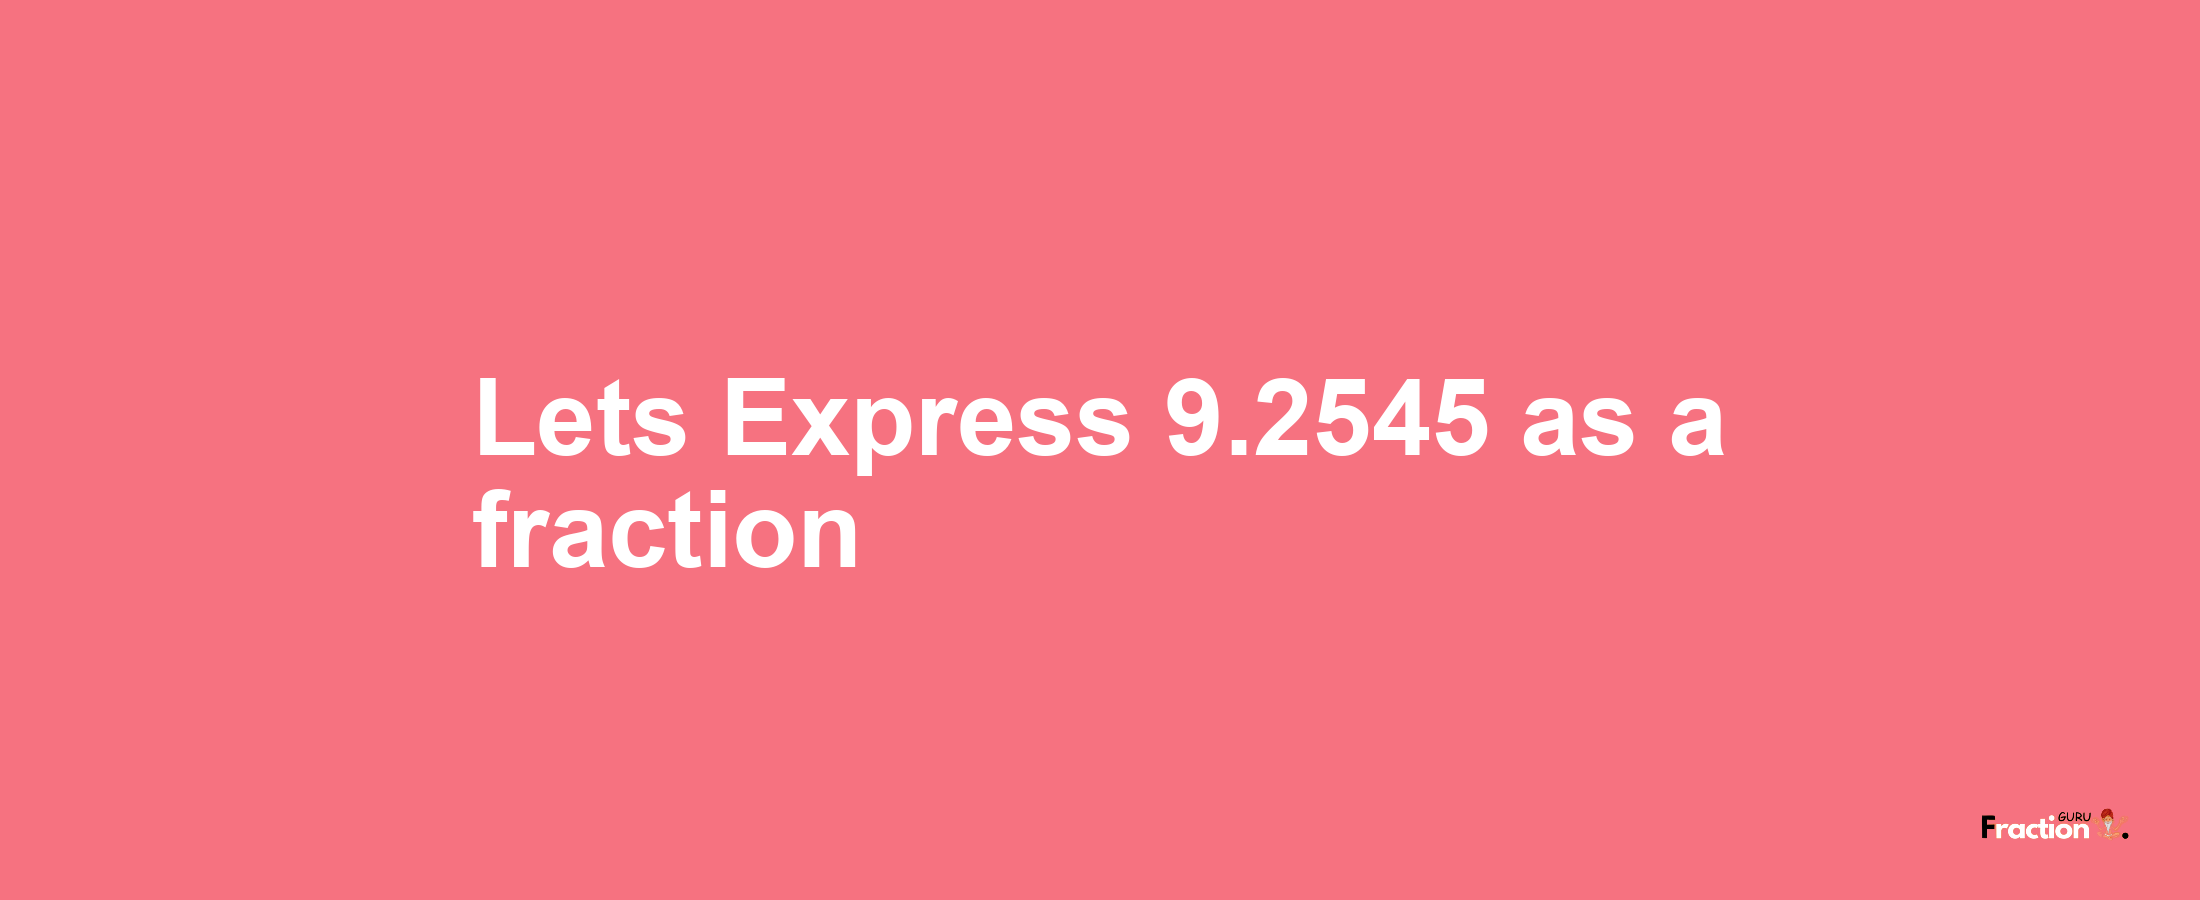 Lets Express 9.2545 as afraction